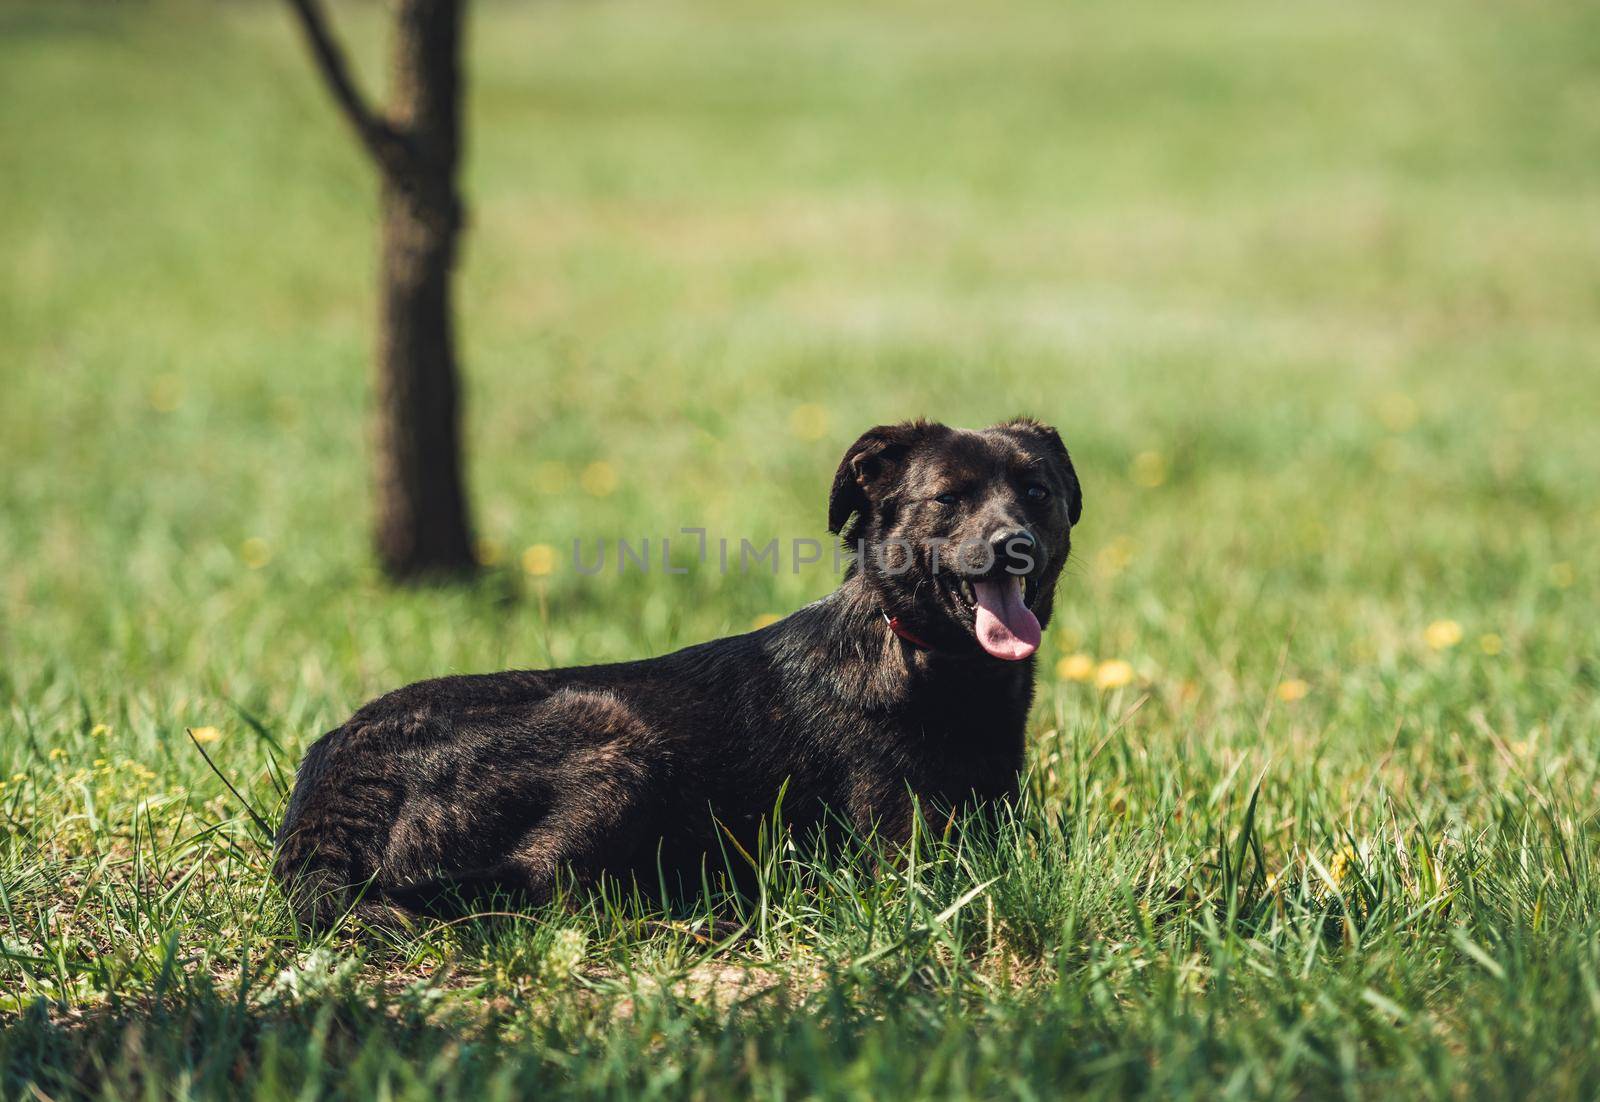 Black little dog with red collar laying on grass field